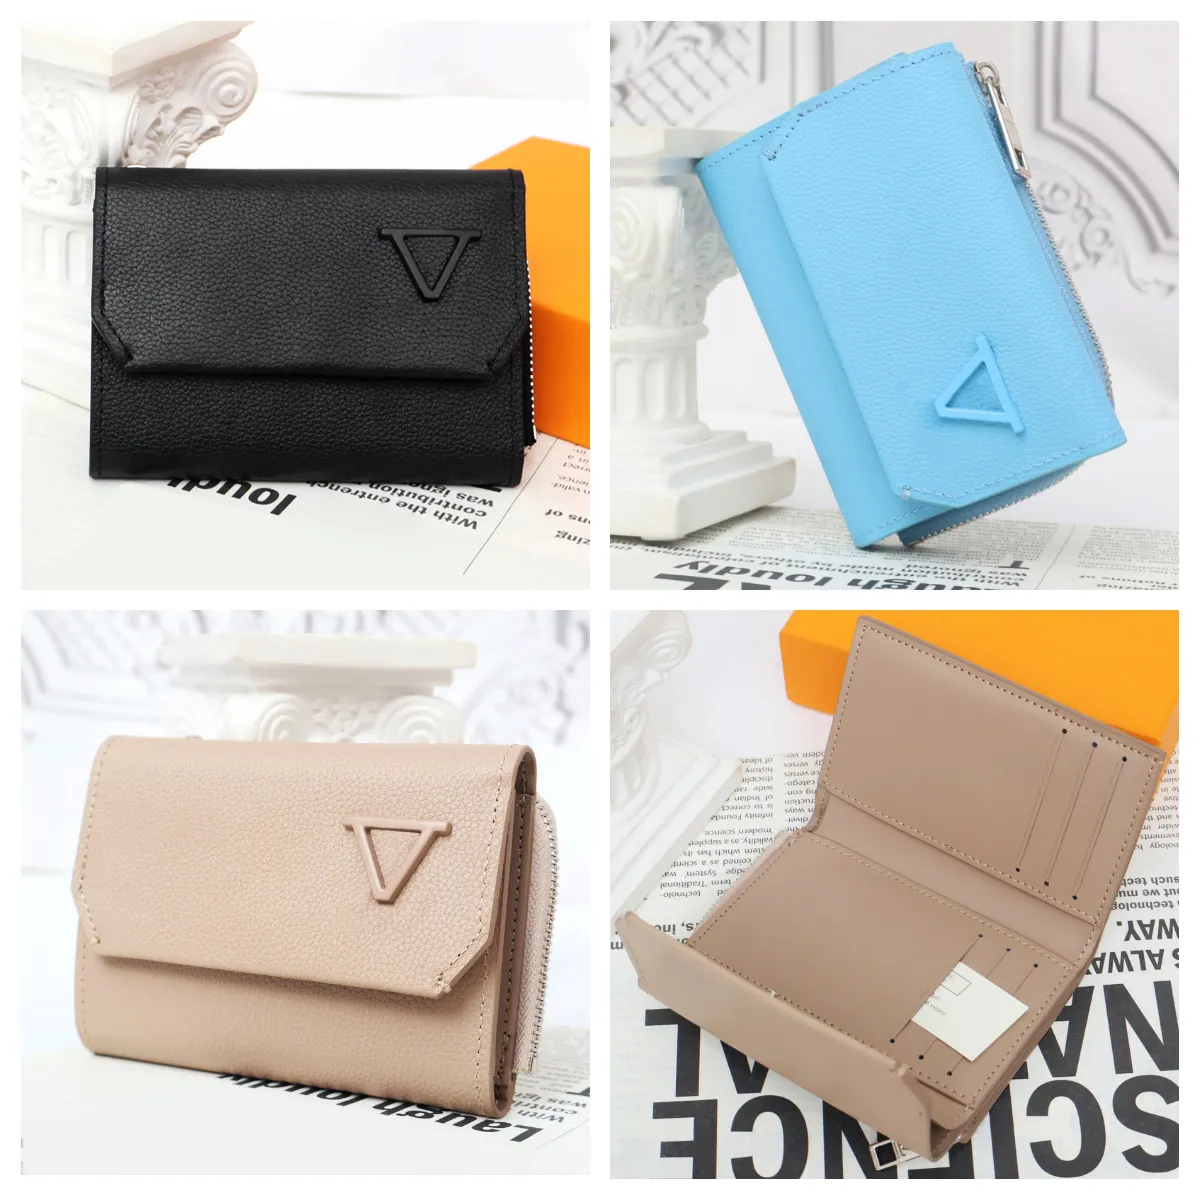 Mirror Quality Luxury small wallet Designer trifold leather small Man Woman mini Card wallet Key Coin purse trifold Money clip Fashion Simple Brand Cards holde purse